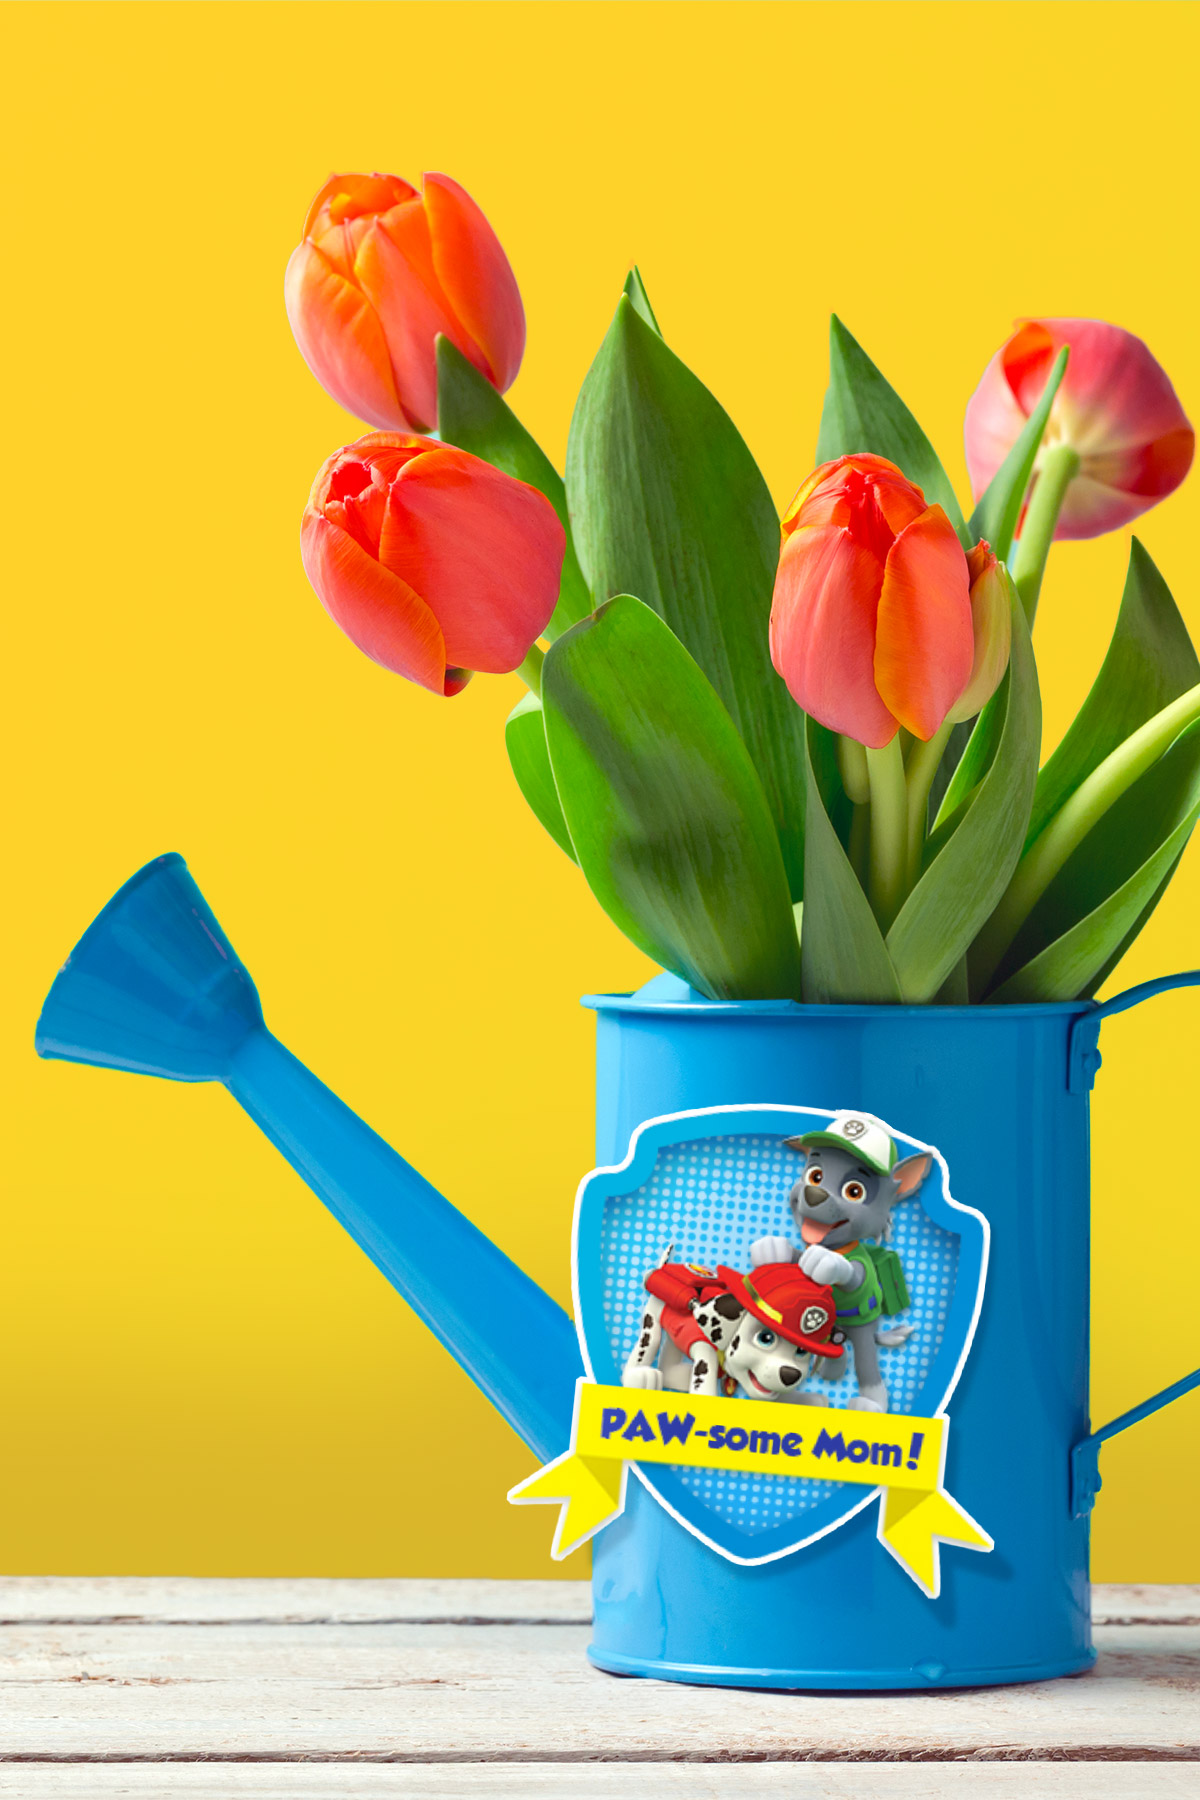 PAW Patrol Mother's Day Stickers